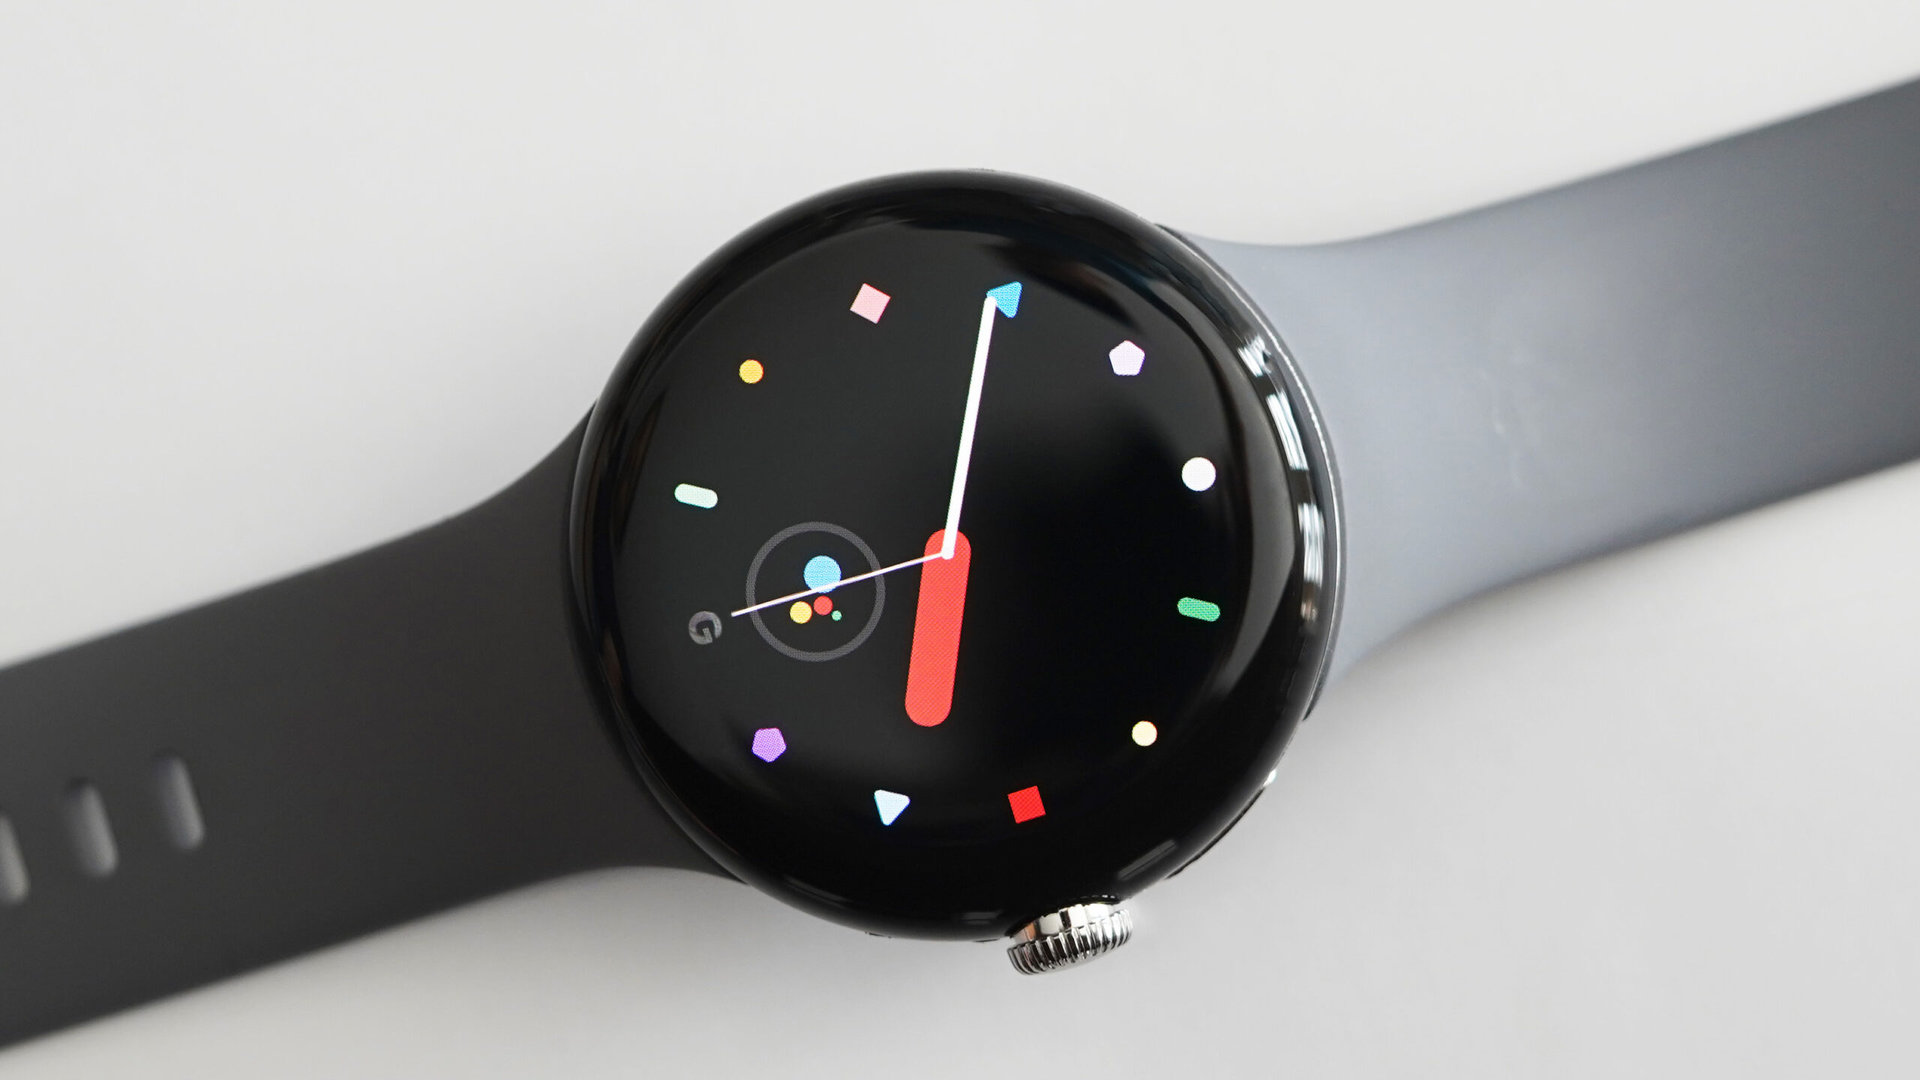 PSA: Your Pixel Watch can turn itself off due to excessive heat